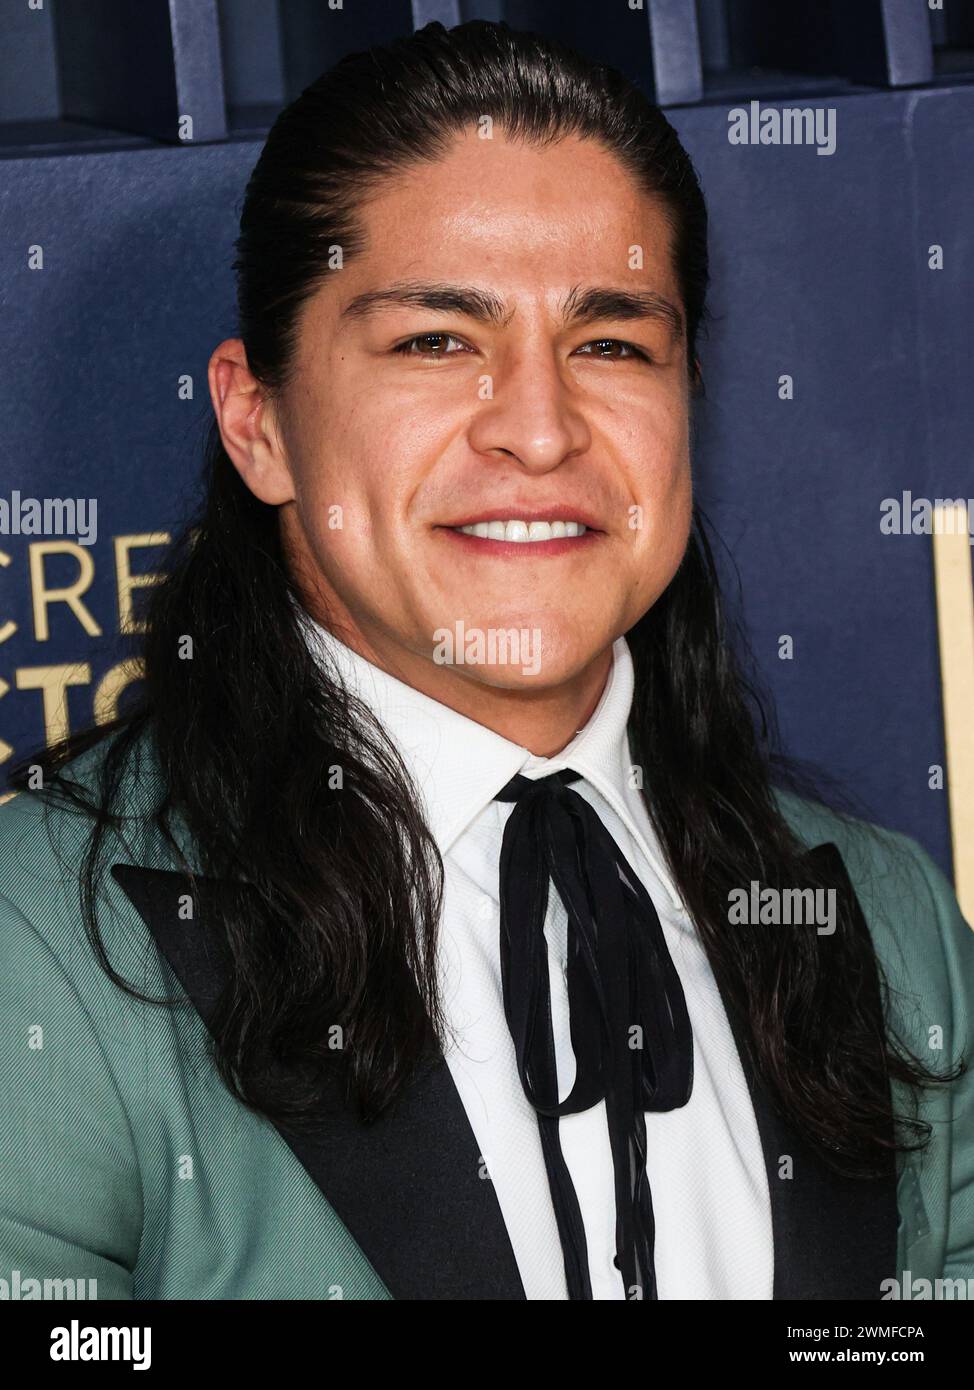 LOS ANGELES, CALIFORNIA, USA - FEBRUARY 24: Cristo Fernandez arrives at the 30th Annual Screen Actors Guild Awards held at the Shrine Auditorium and Expo Hall on February 24, 2024 in Los Angeles, California, United States. (Photo by Xavier Collin/Image Press Agency) Stock Photo